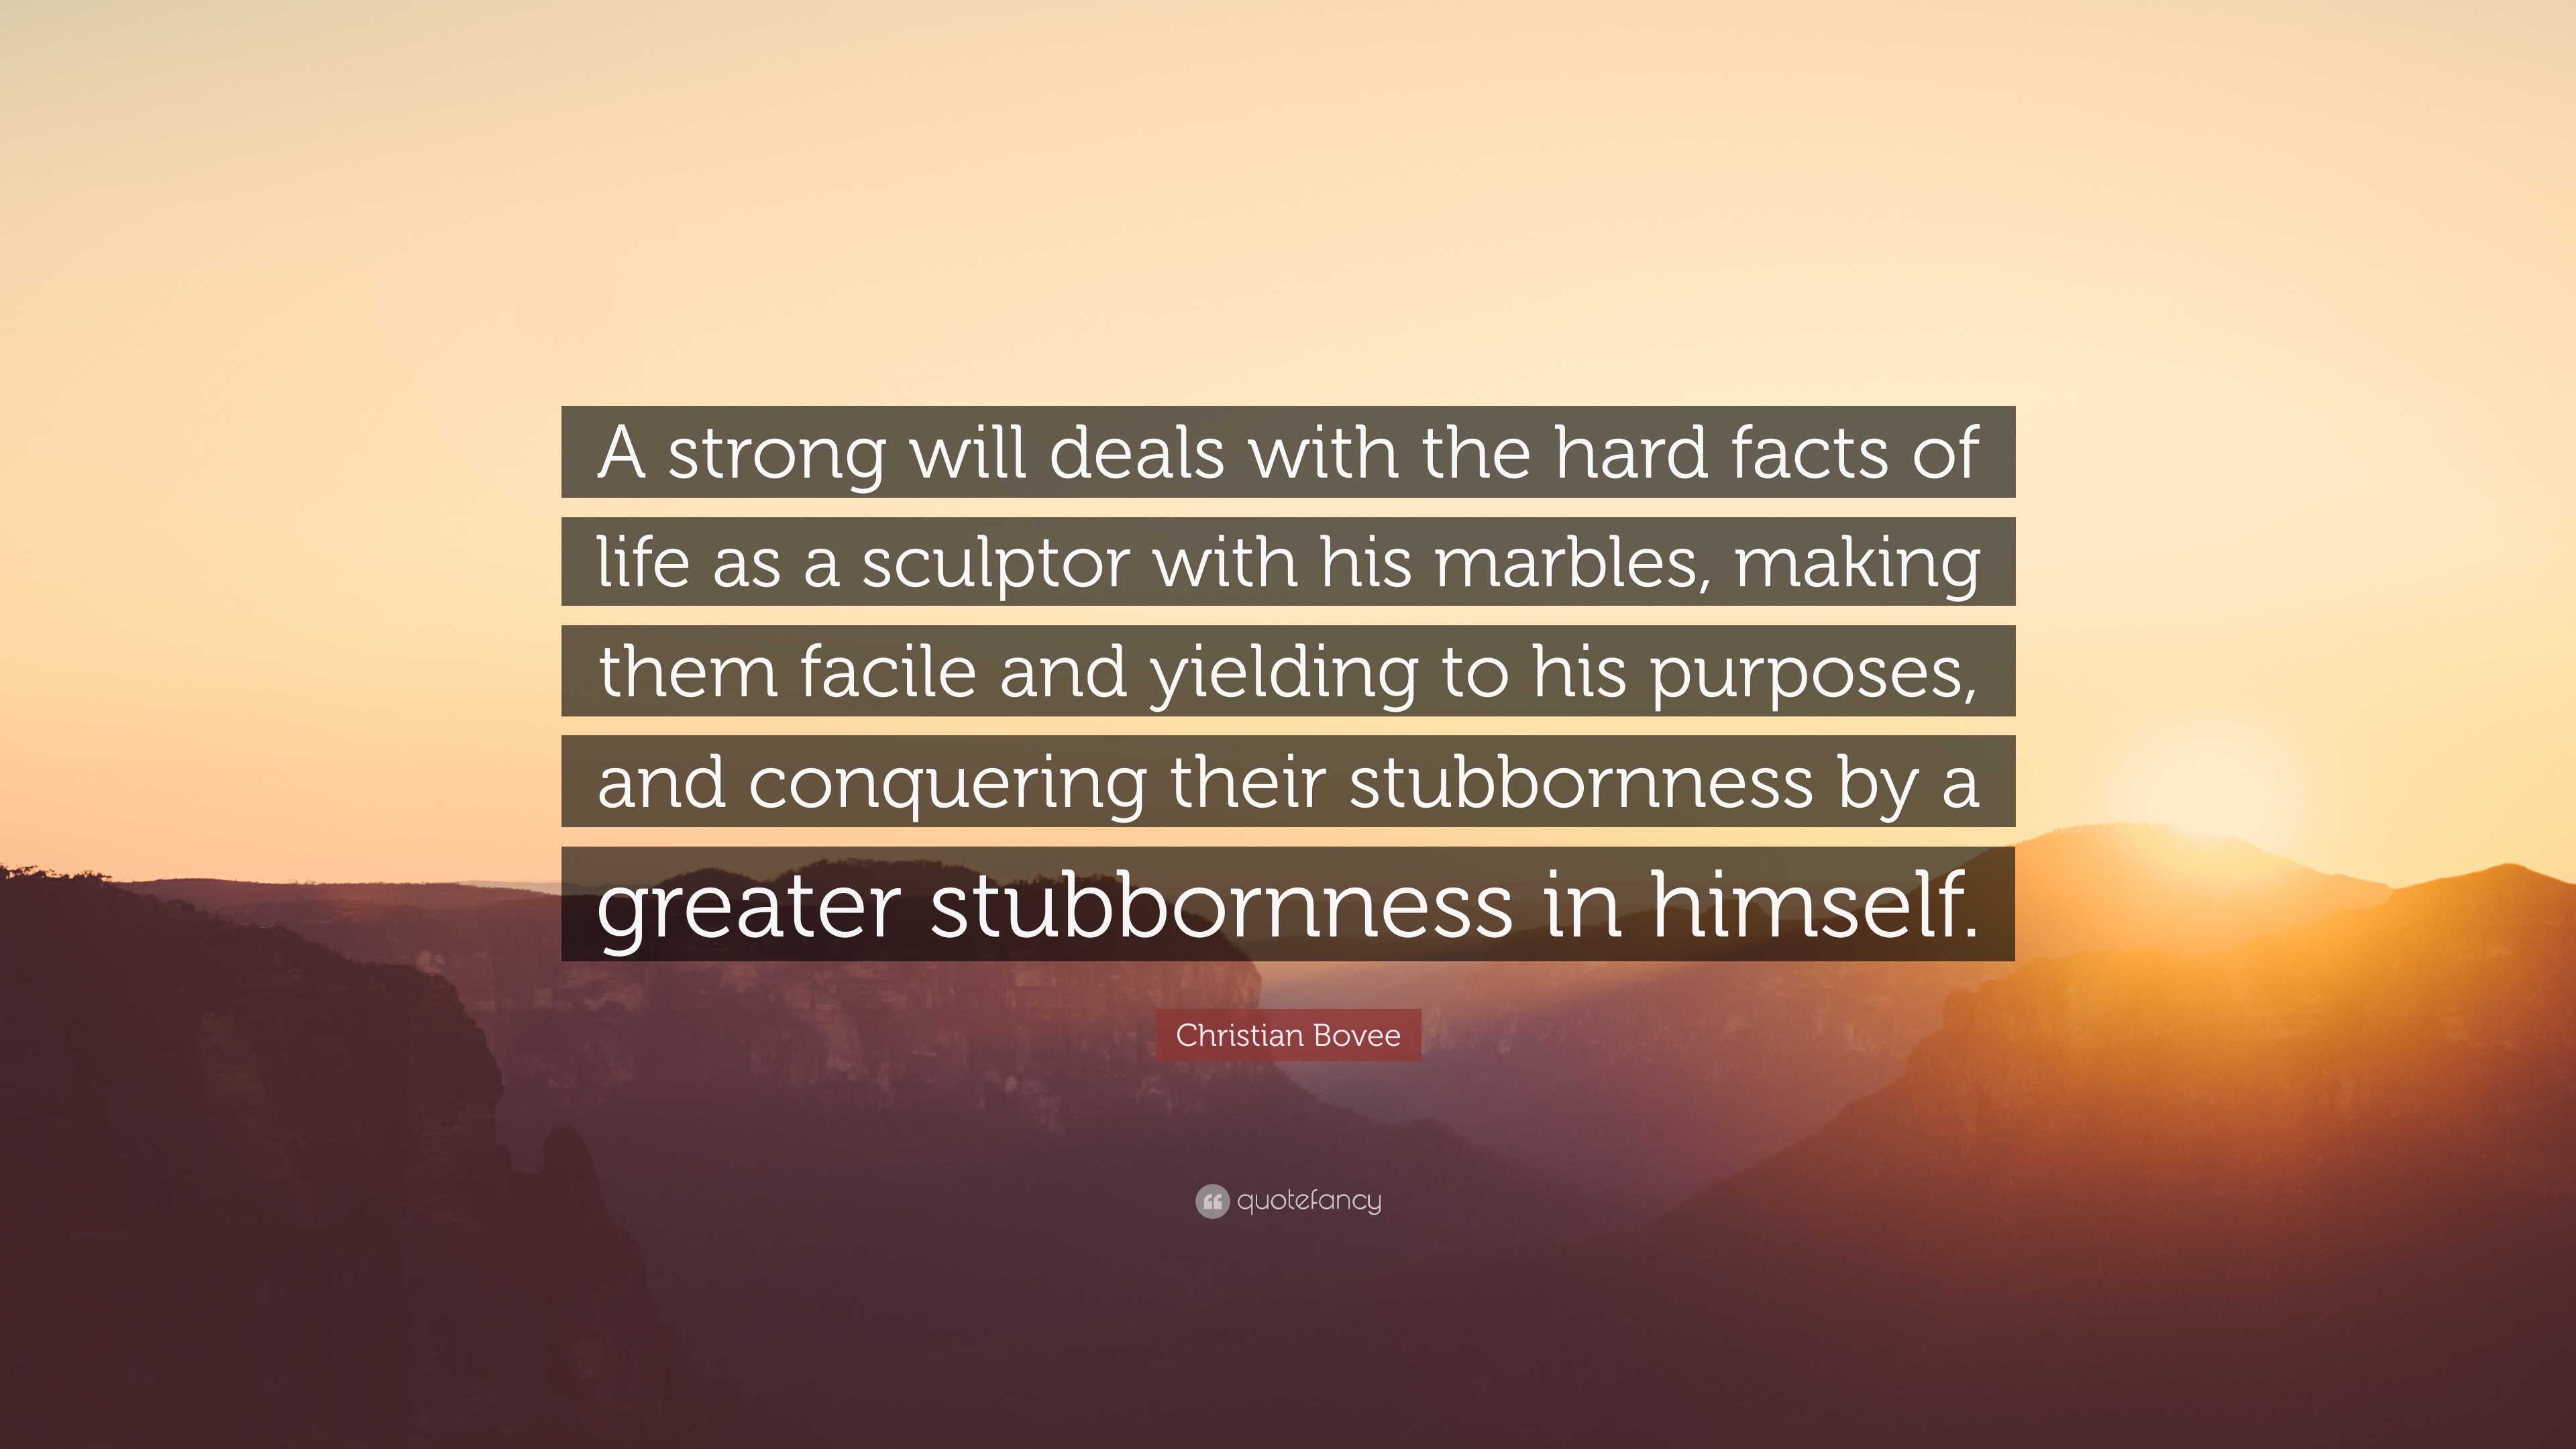 Christian N Bovee Quote “A strong will deals with the hard facts of